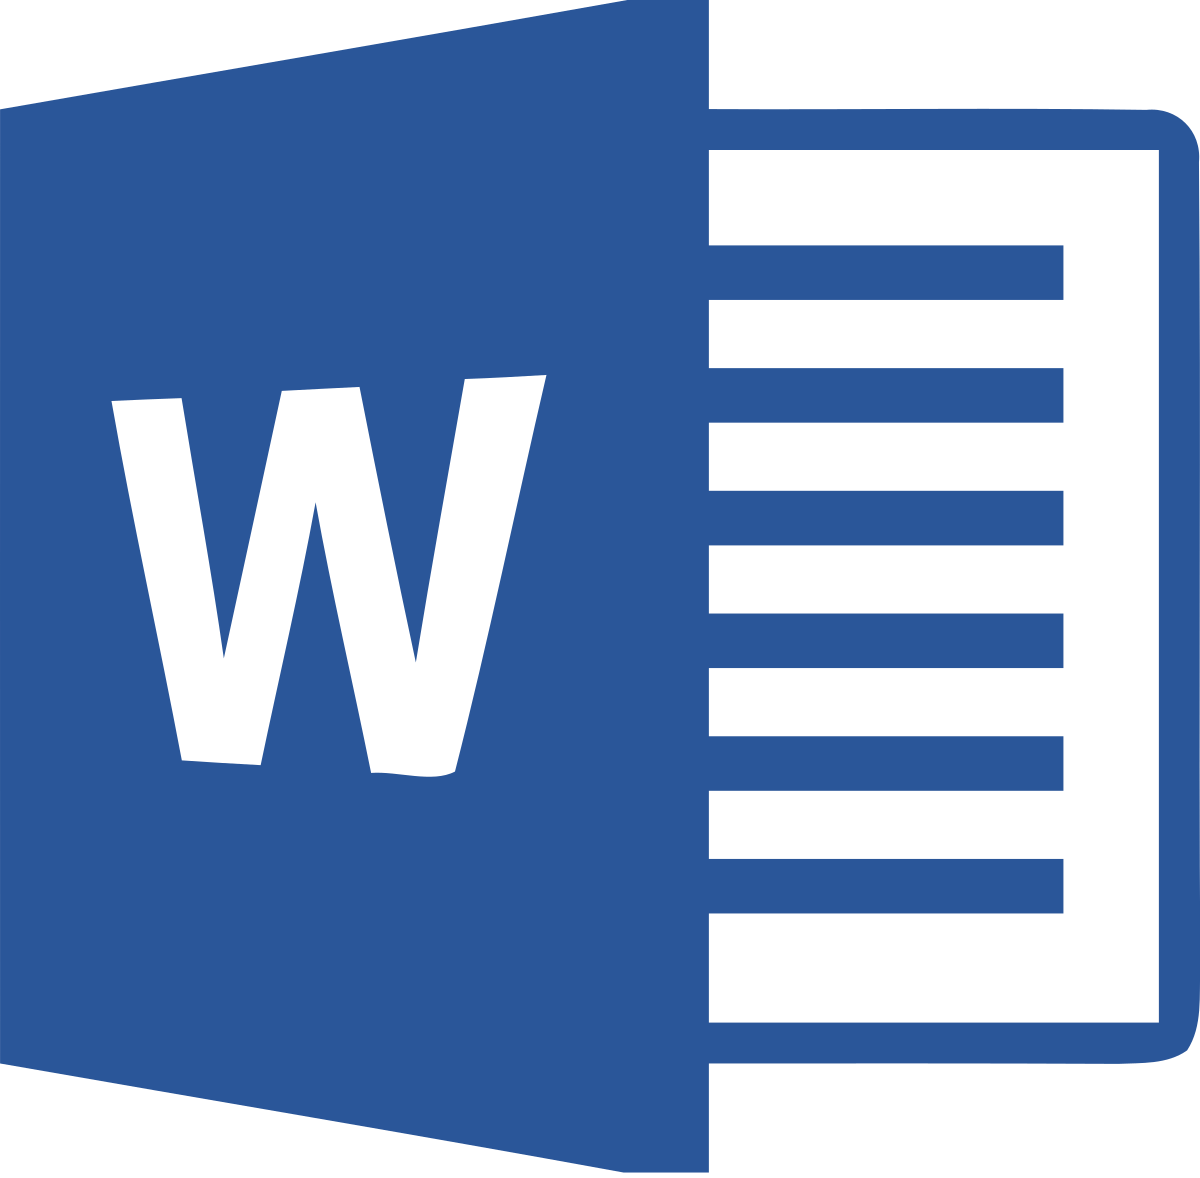 Kutools for Word Crack 10.0.2 Latest Version Free Download 2023